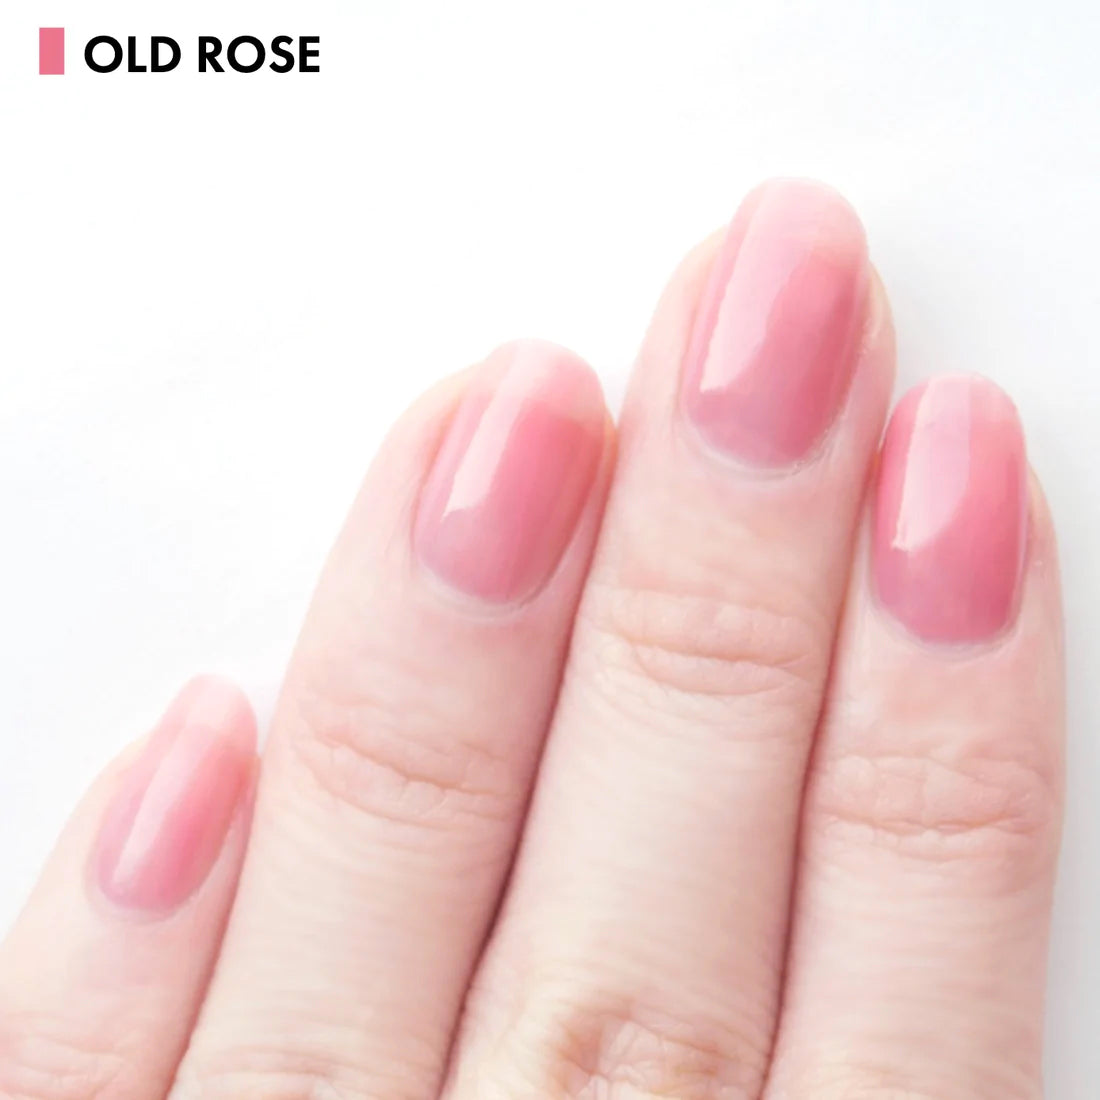 HOMEI 12 Free Nail Hardener Old Rose Nail Polishes Homei   